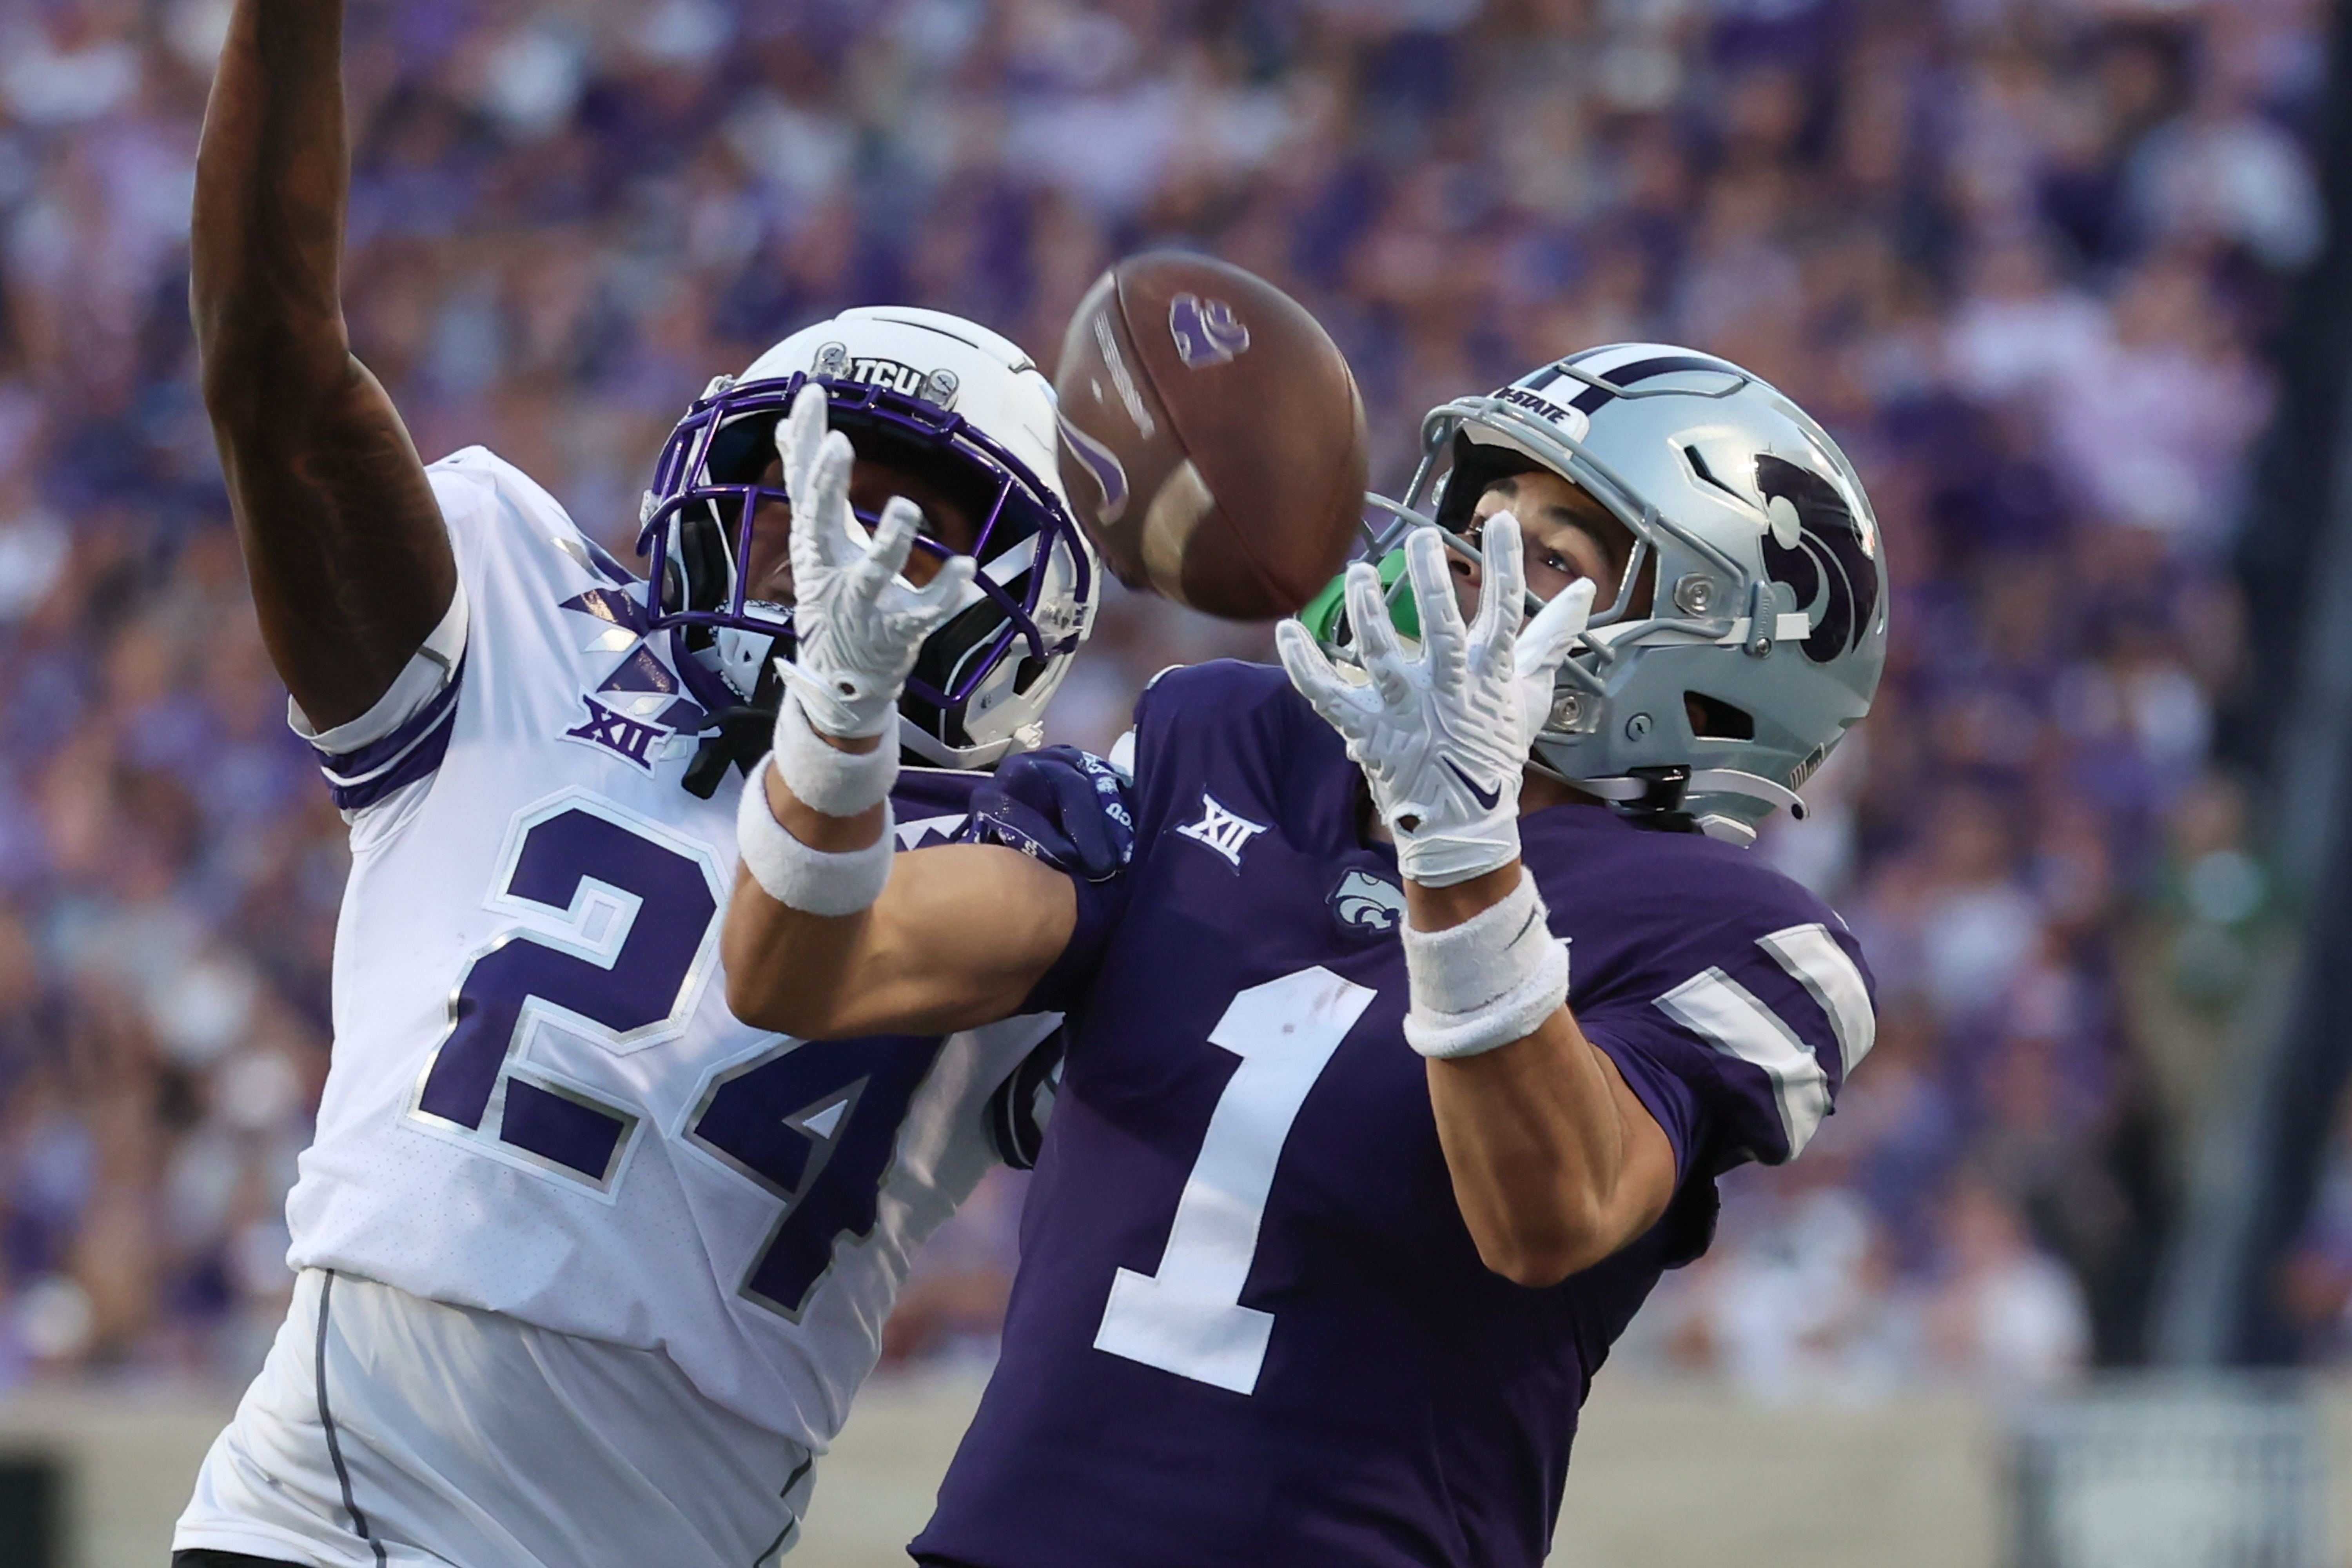 MANHATTAN, KS - OCTOBER 21: Kansas State Wildcats wide receiver Jayce Brown (1) makes a catch over TCU Horned Frogs cornerback Avery Helm (24) for 26-yards in the first quarter of a Big 12 college football game between the TCU Horned Frogs and Kansas State Wildcats on Oct 21, 2023 at Bill Snyder Family Stadium in Manhattan, KS.